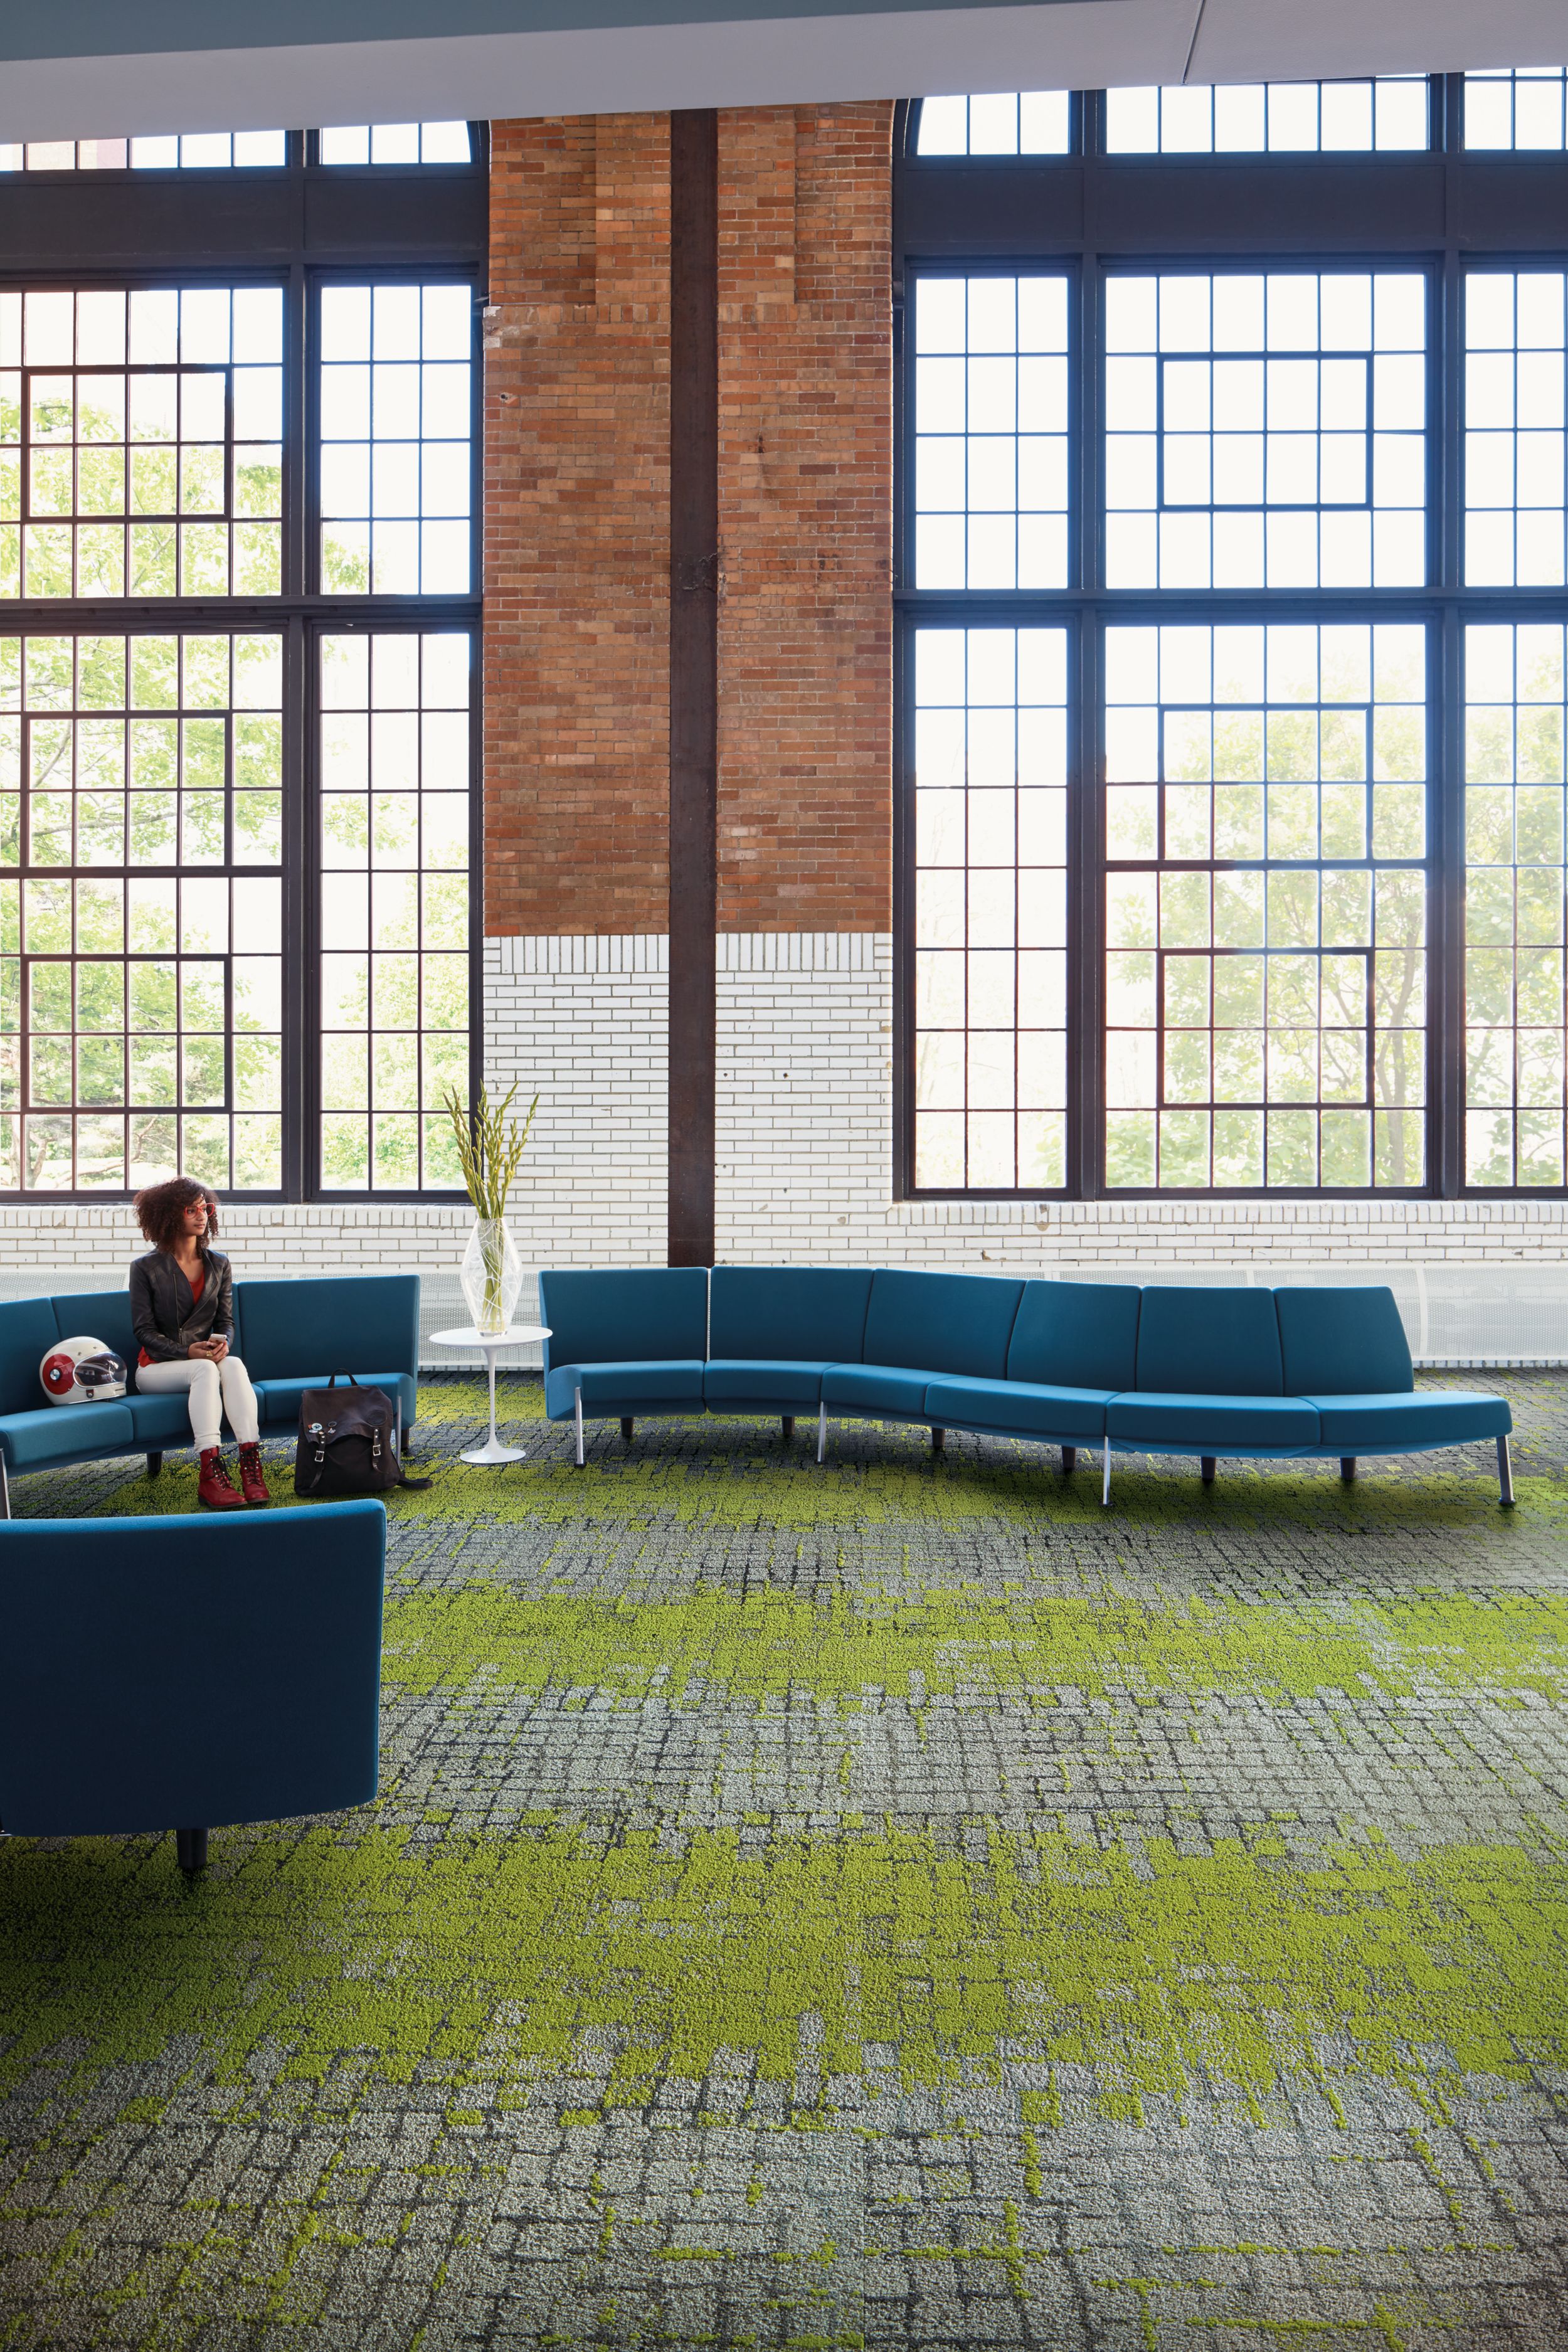 Interface Moss and Moss in Stone carpet tile in seating area with blue couches and women seated afbeeldingnummer 1